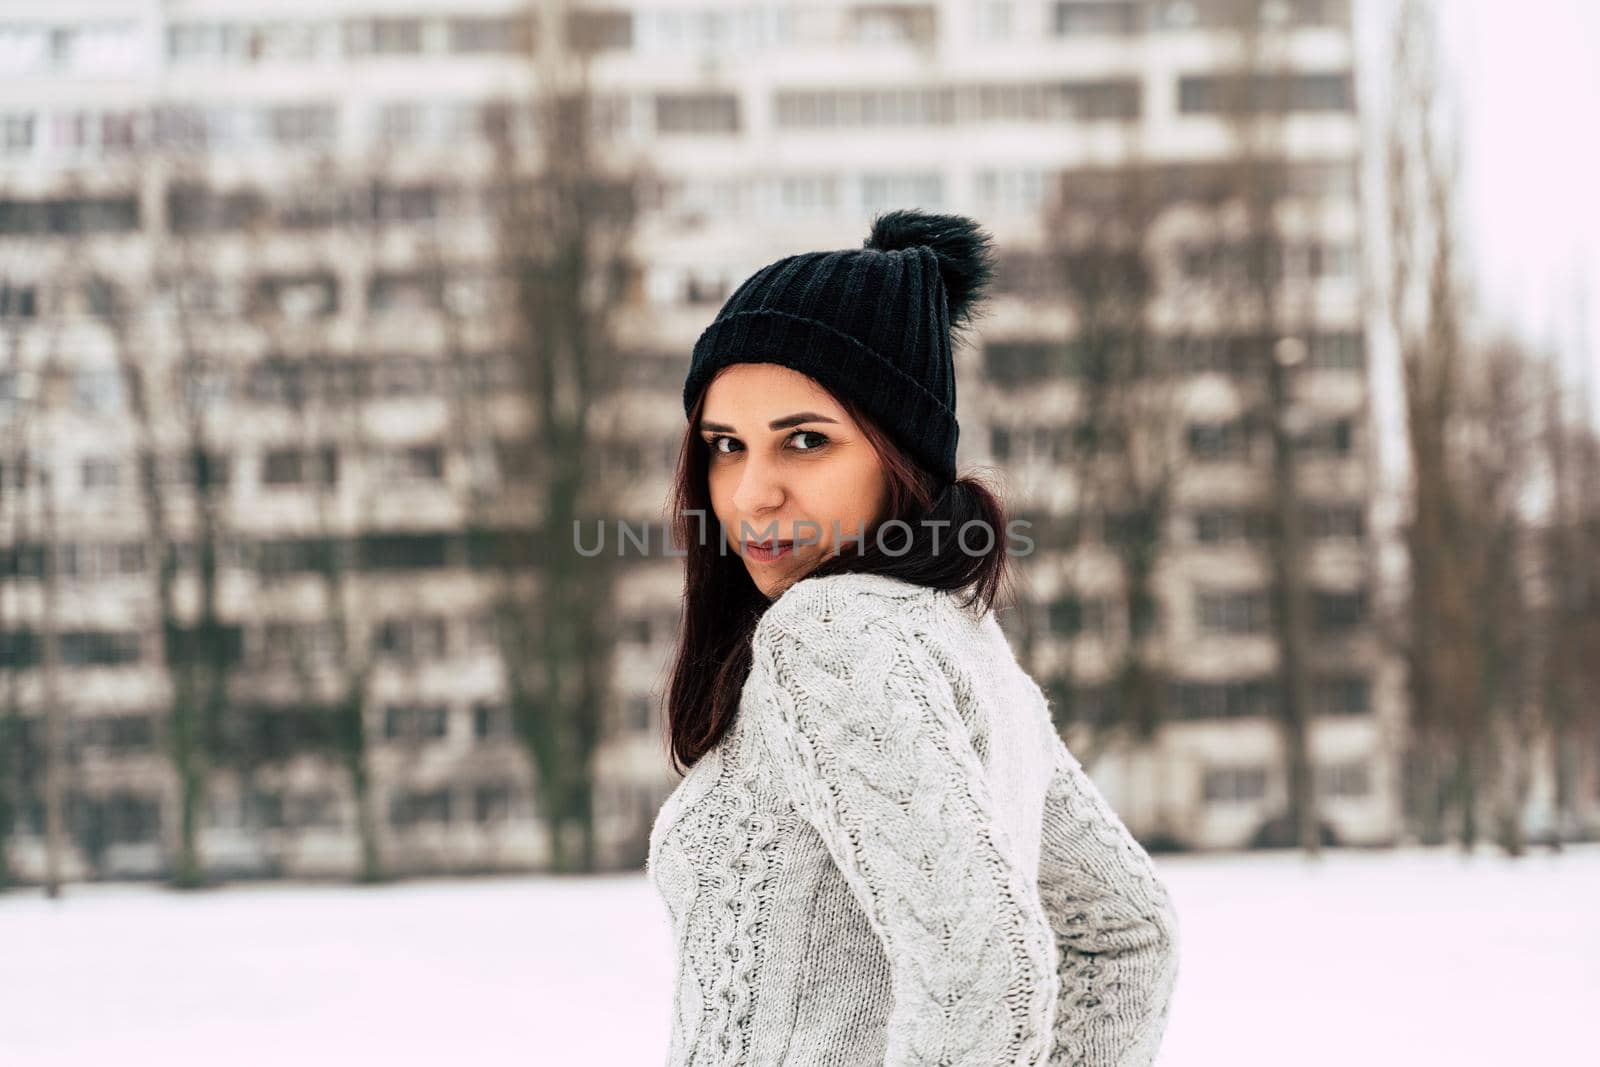 Young, beautiful woman with winter cap and gray sweater standing outside in winter